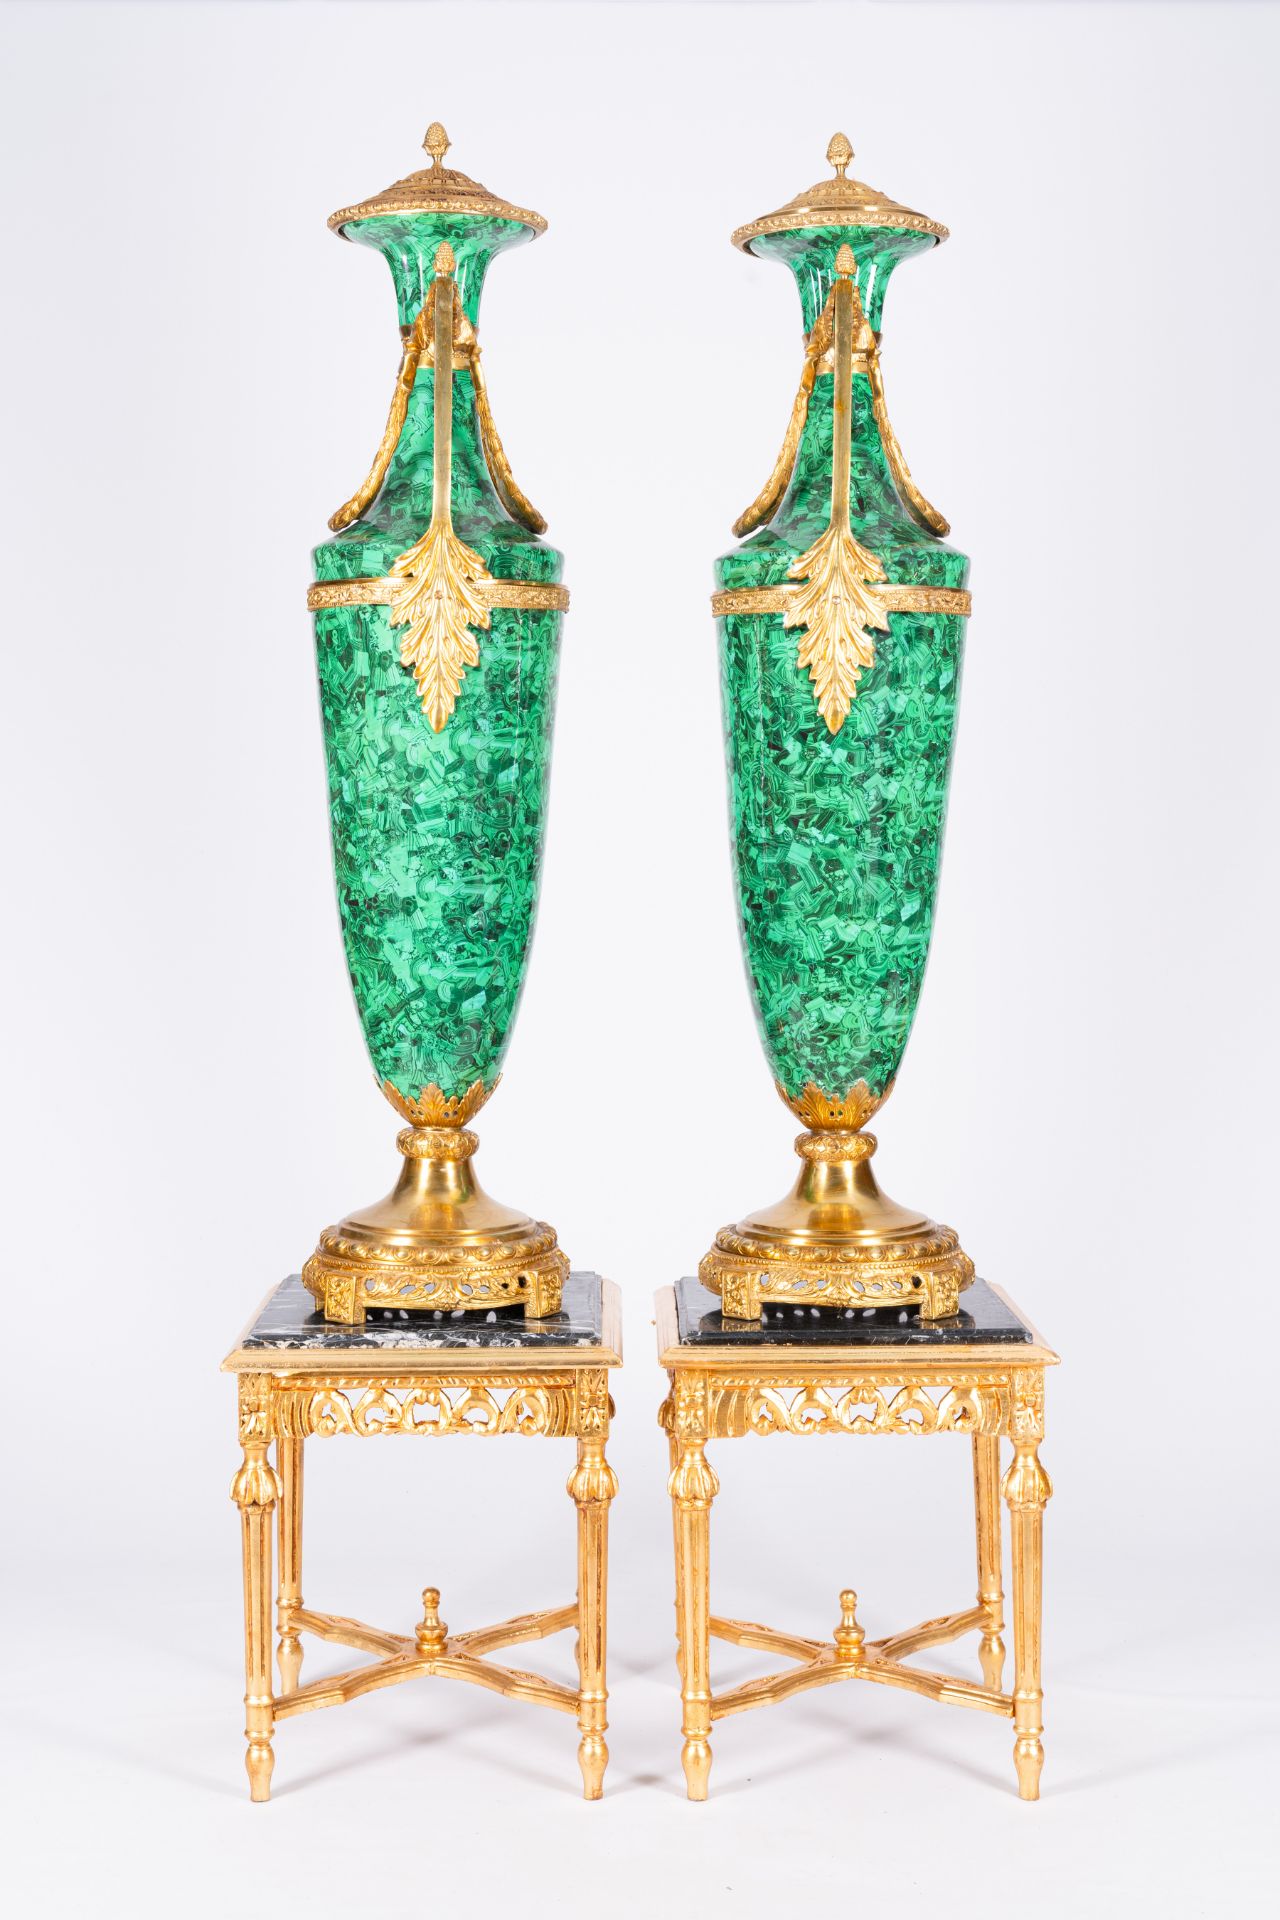 A pair of large gilt bronze mounted faux-malachite vases on matching gilt wood bases with marble top - Image 2 of 4